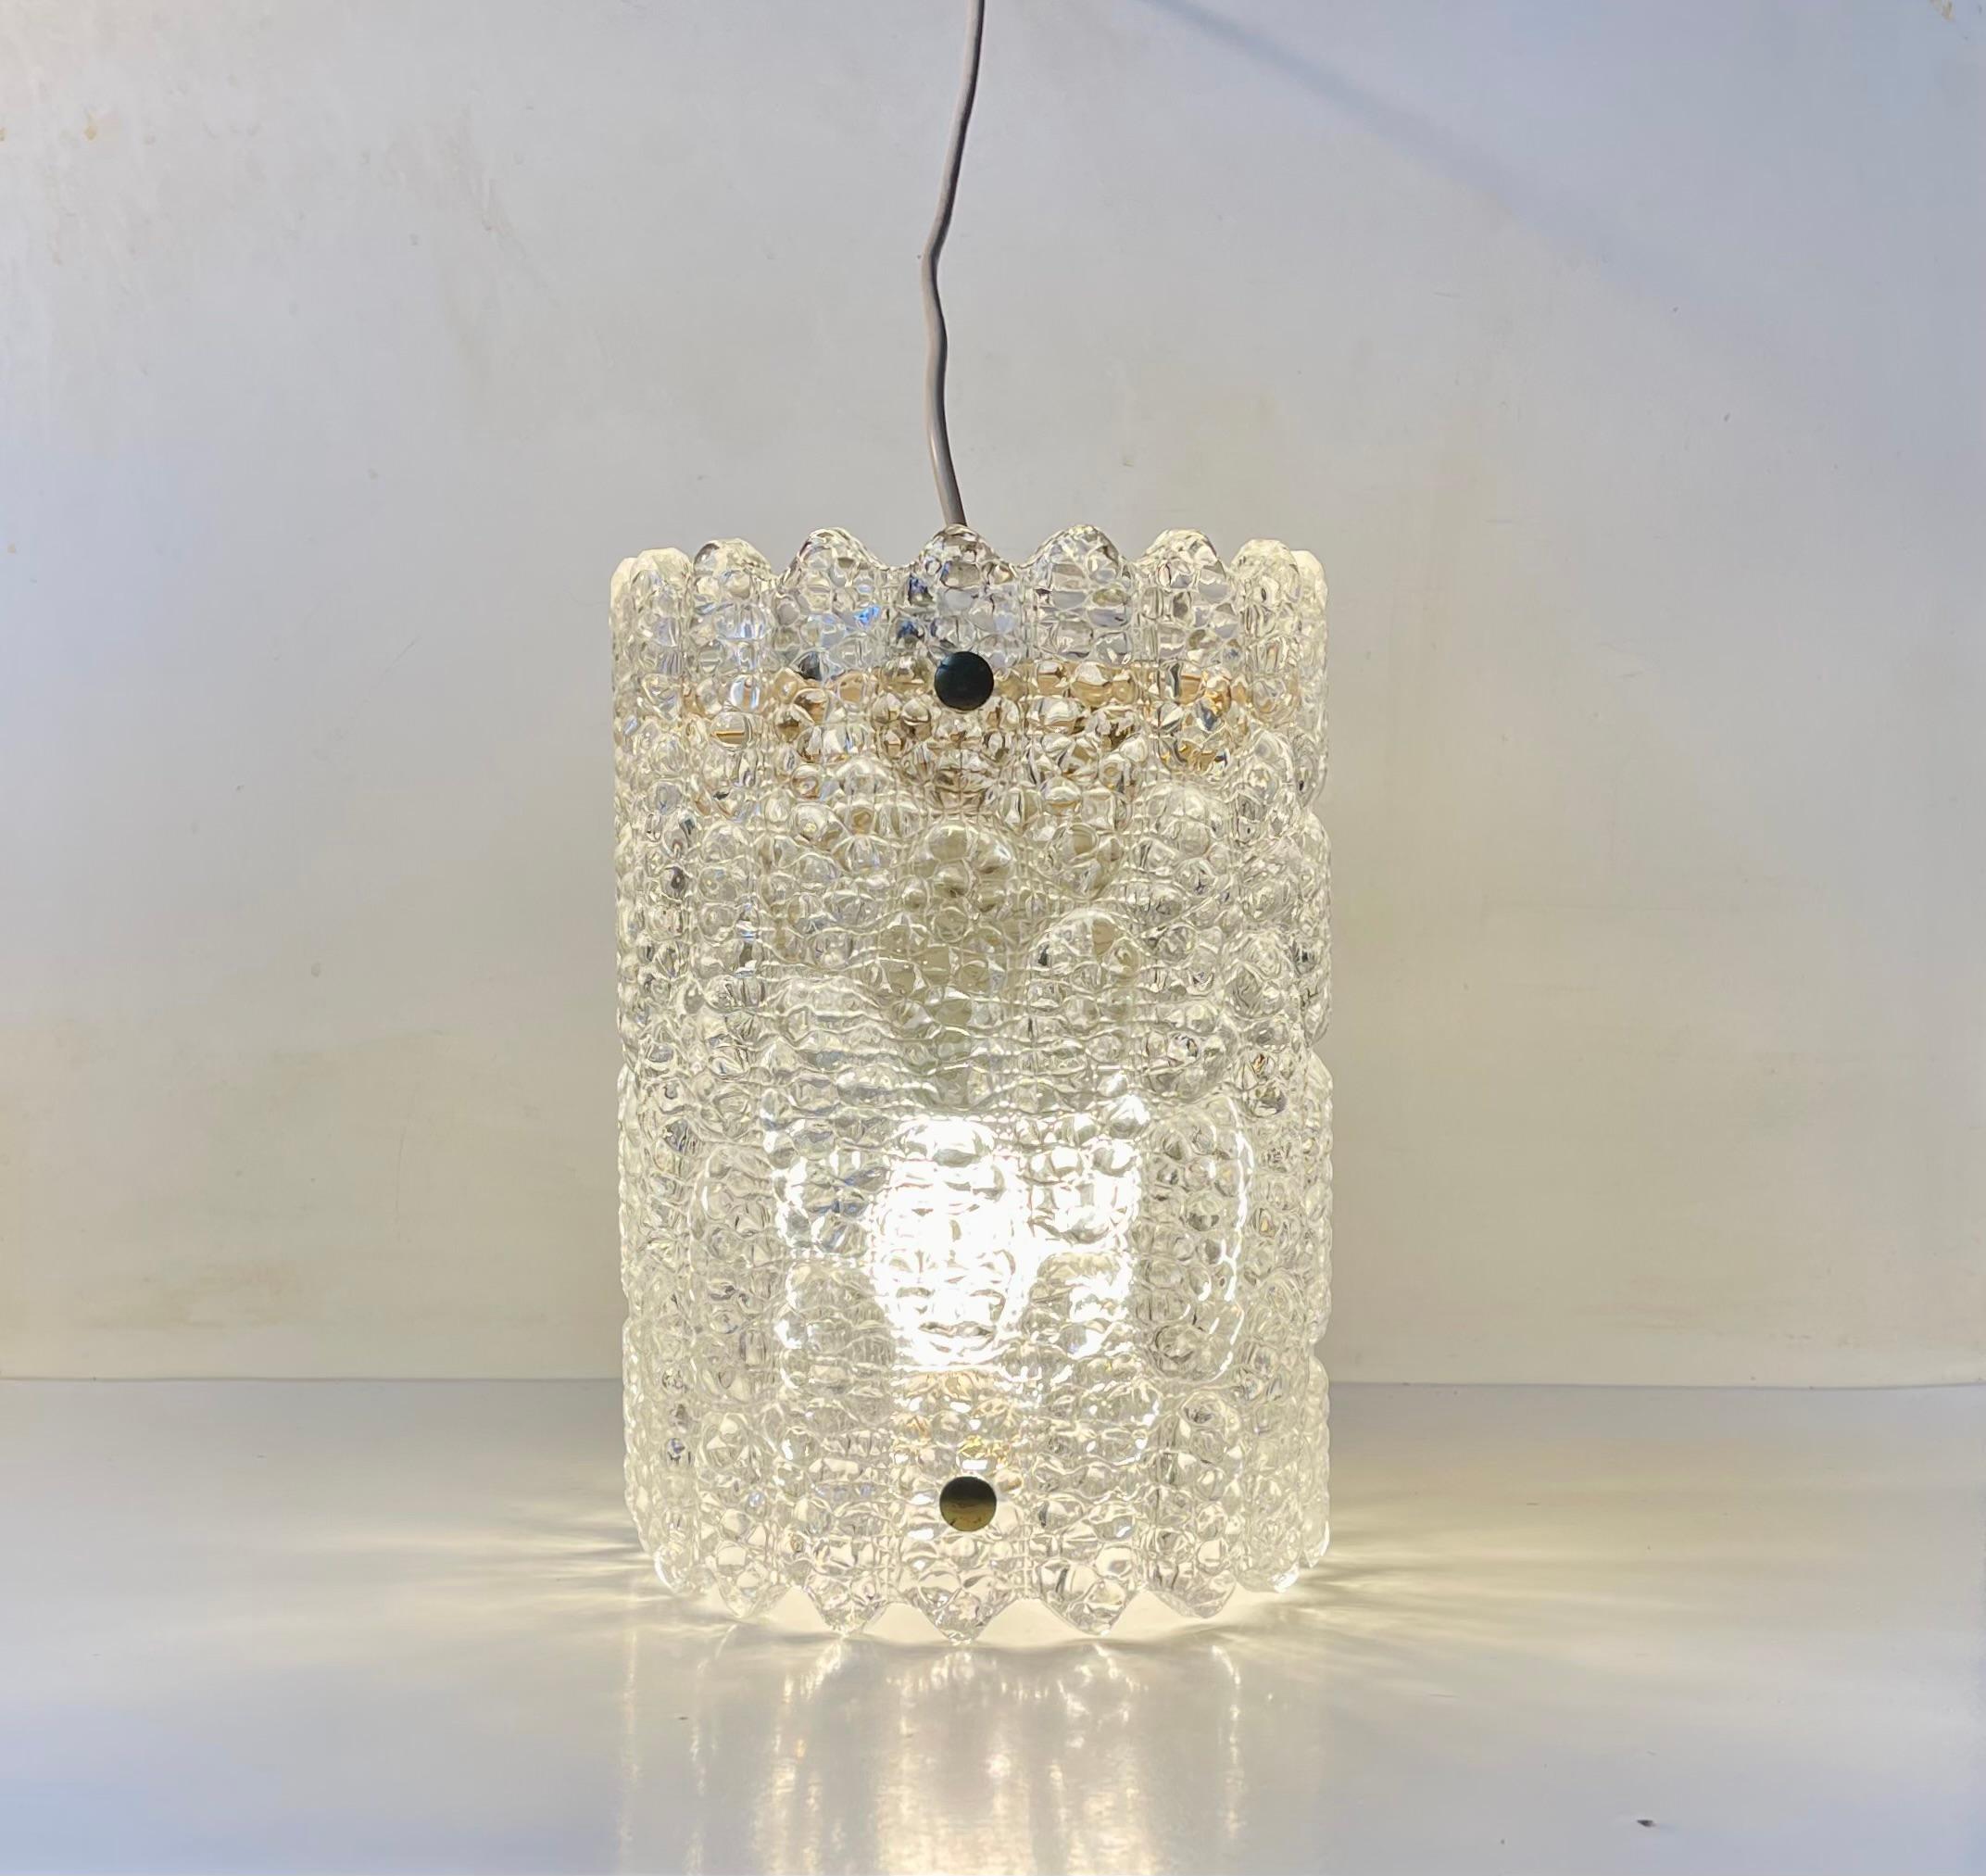 Cylindrical crystal and brass pendant lamp designed by Carl Fagerlund and manufactured by Orrefors in Sweden during the early 1960s. It features its original removable brass plate to the top. Depending on the balance you want between up/down